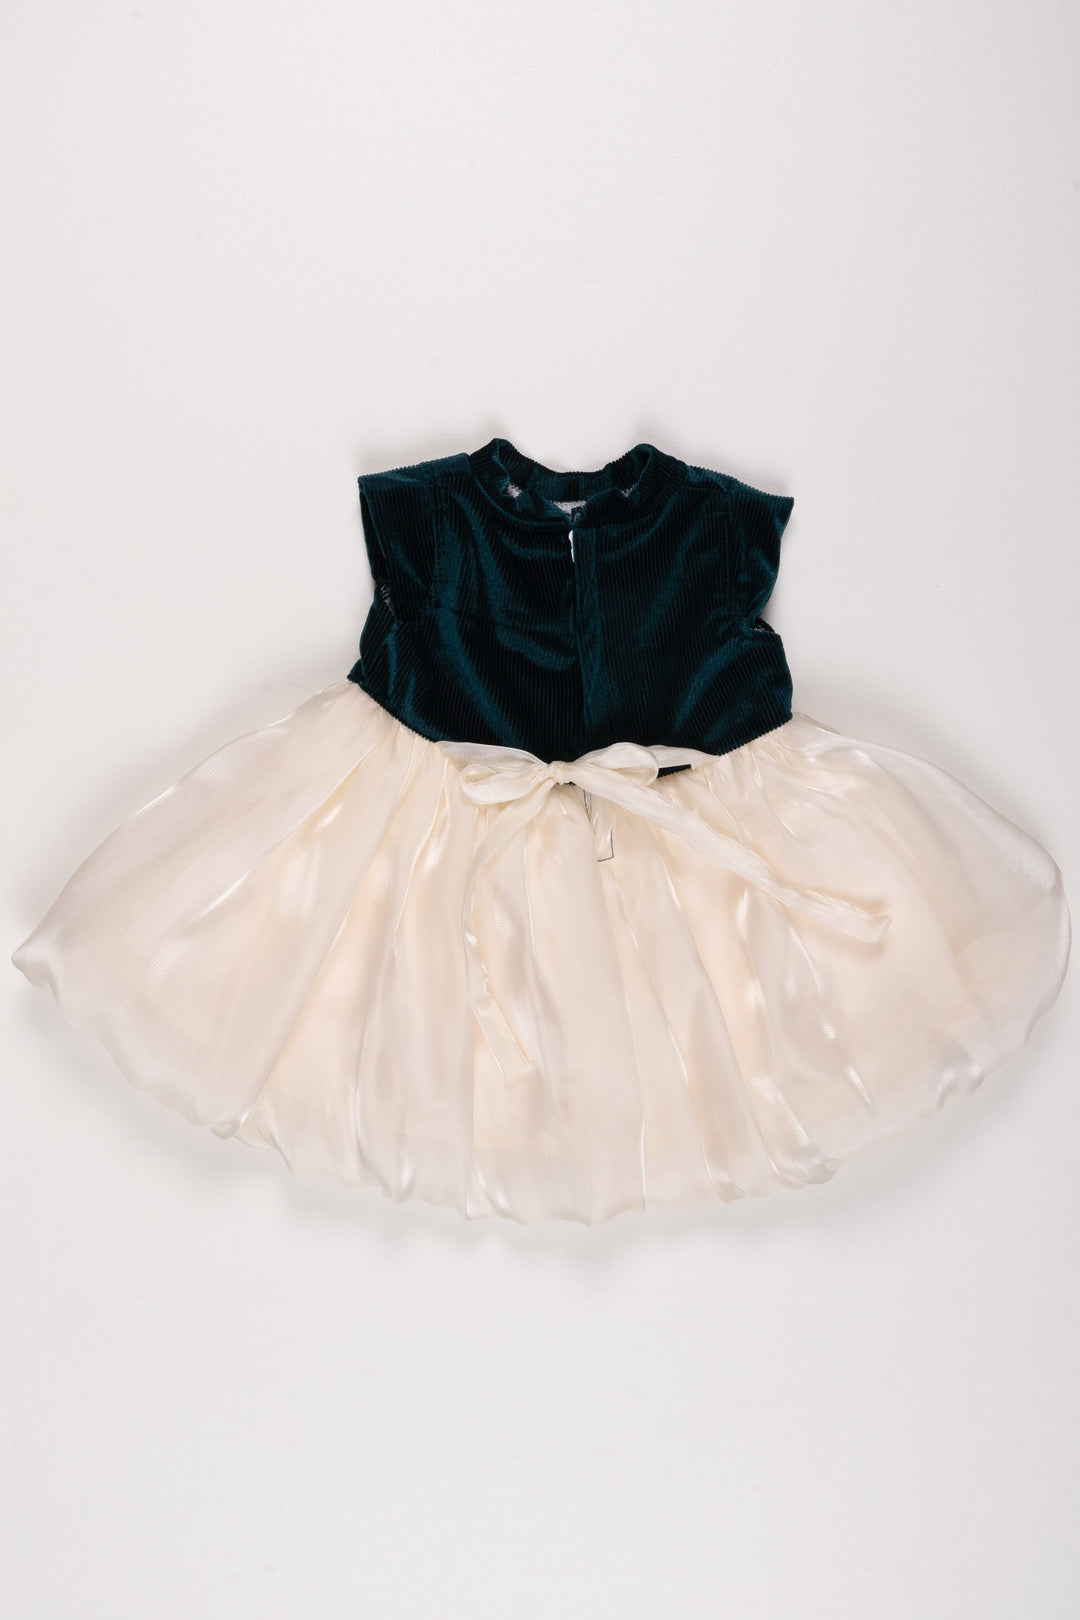 The Nesavu Girls Fancy Party Frock Elegant Dark Green and Ivory Tulle Bow Dress for Girls Nesavu Girls Green Bodice Tulle Dress | Satin Bow Elegant Party Dress | The Nesavu